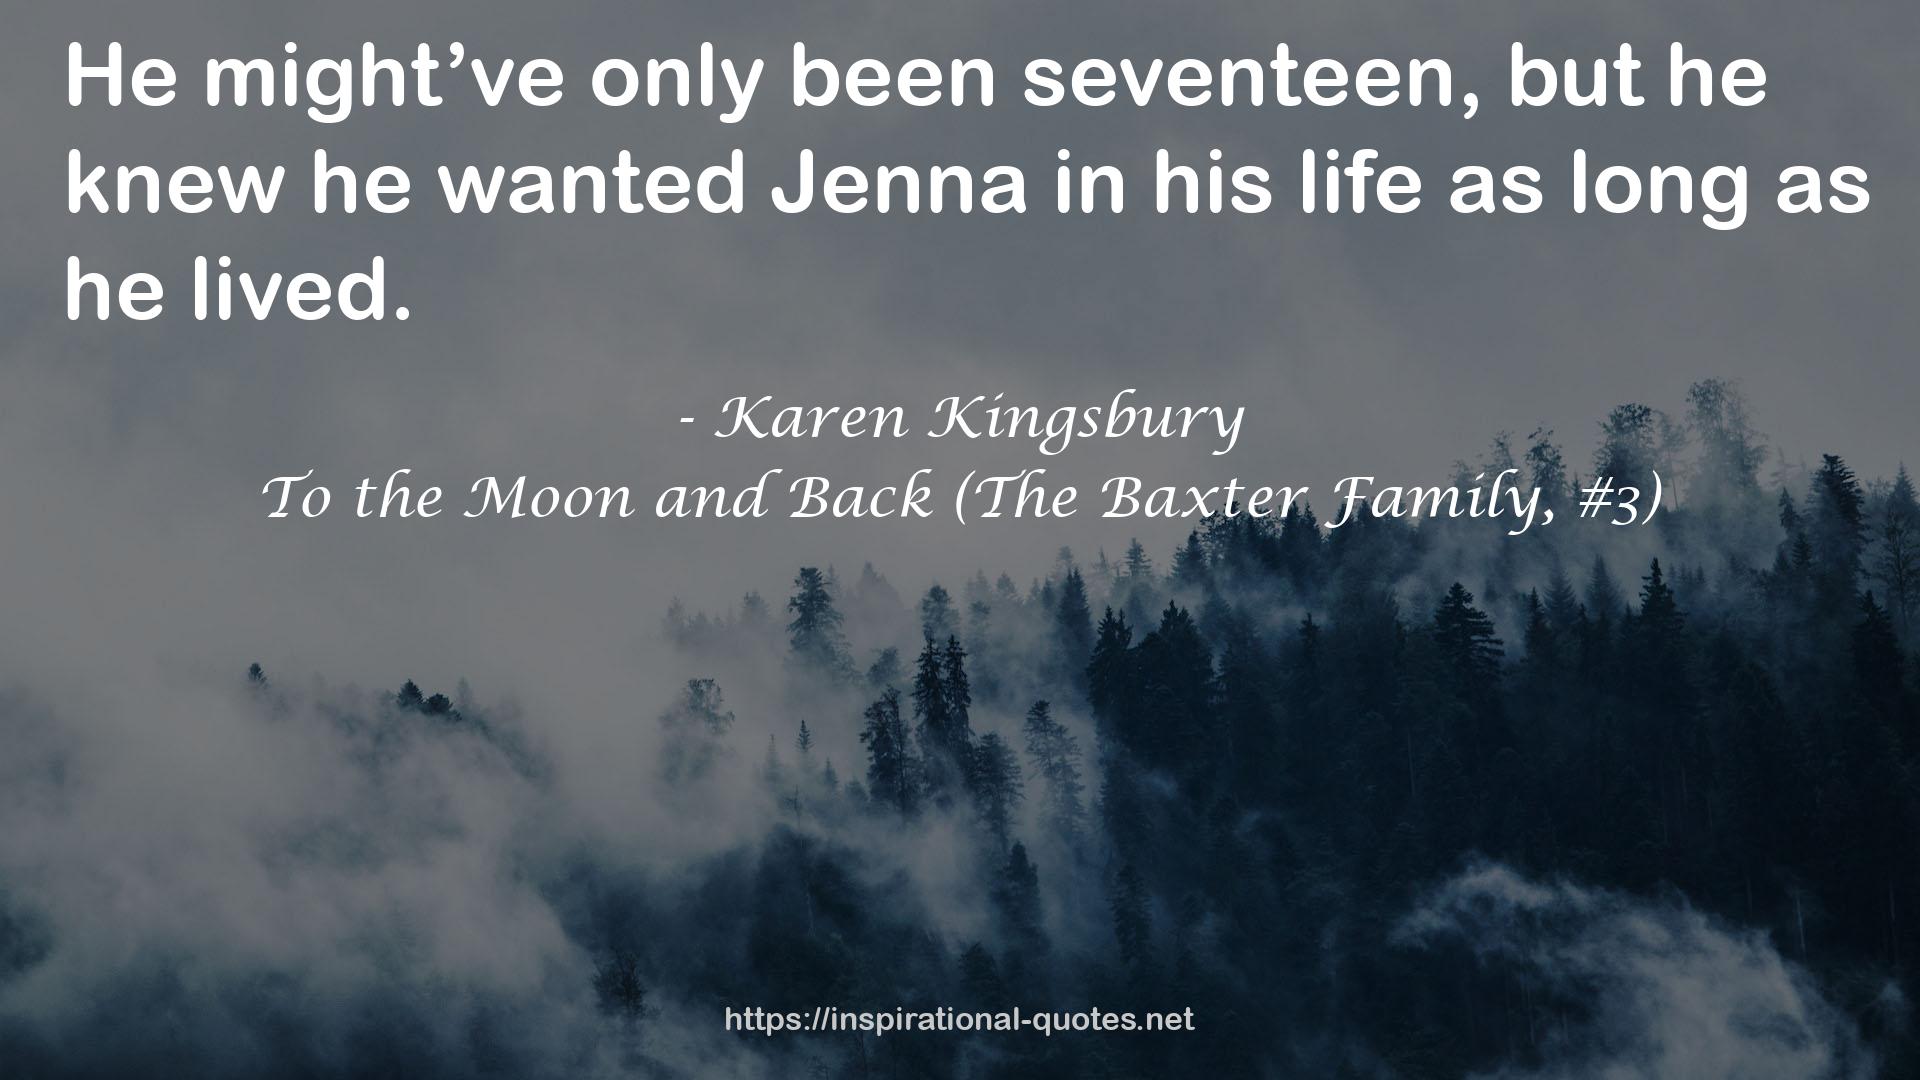 To the Moon and Back (The Baxter Family, #3) QUOTES